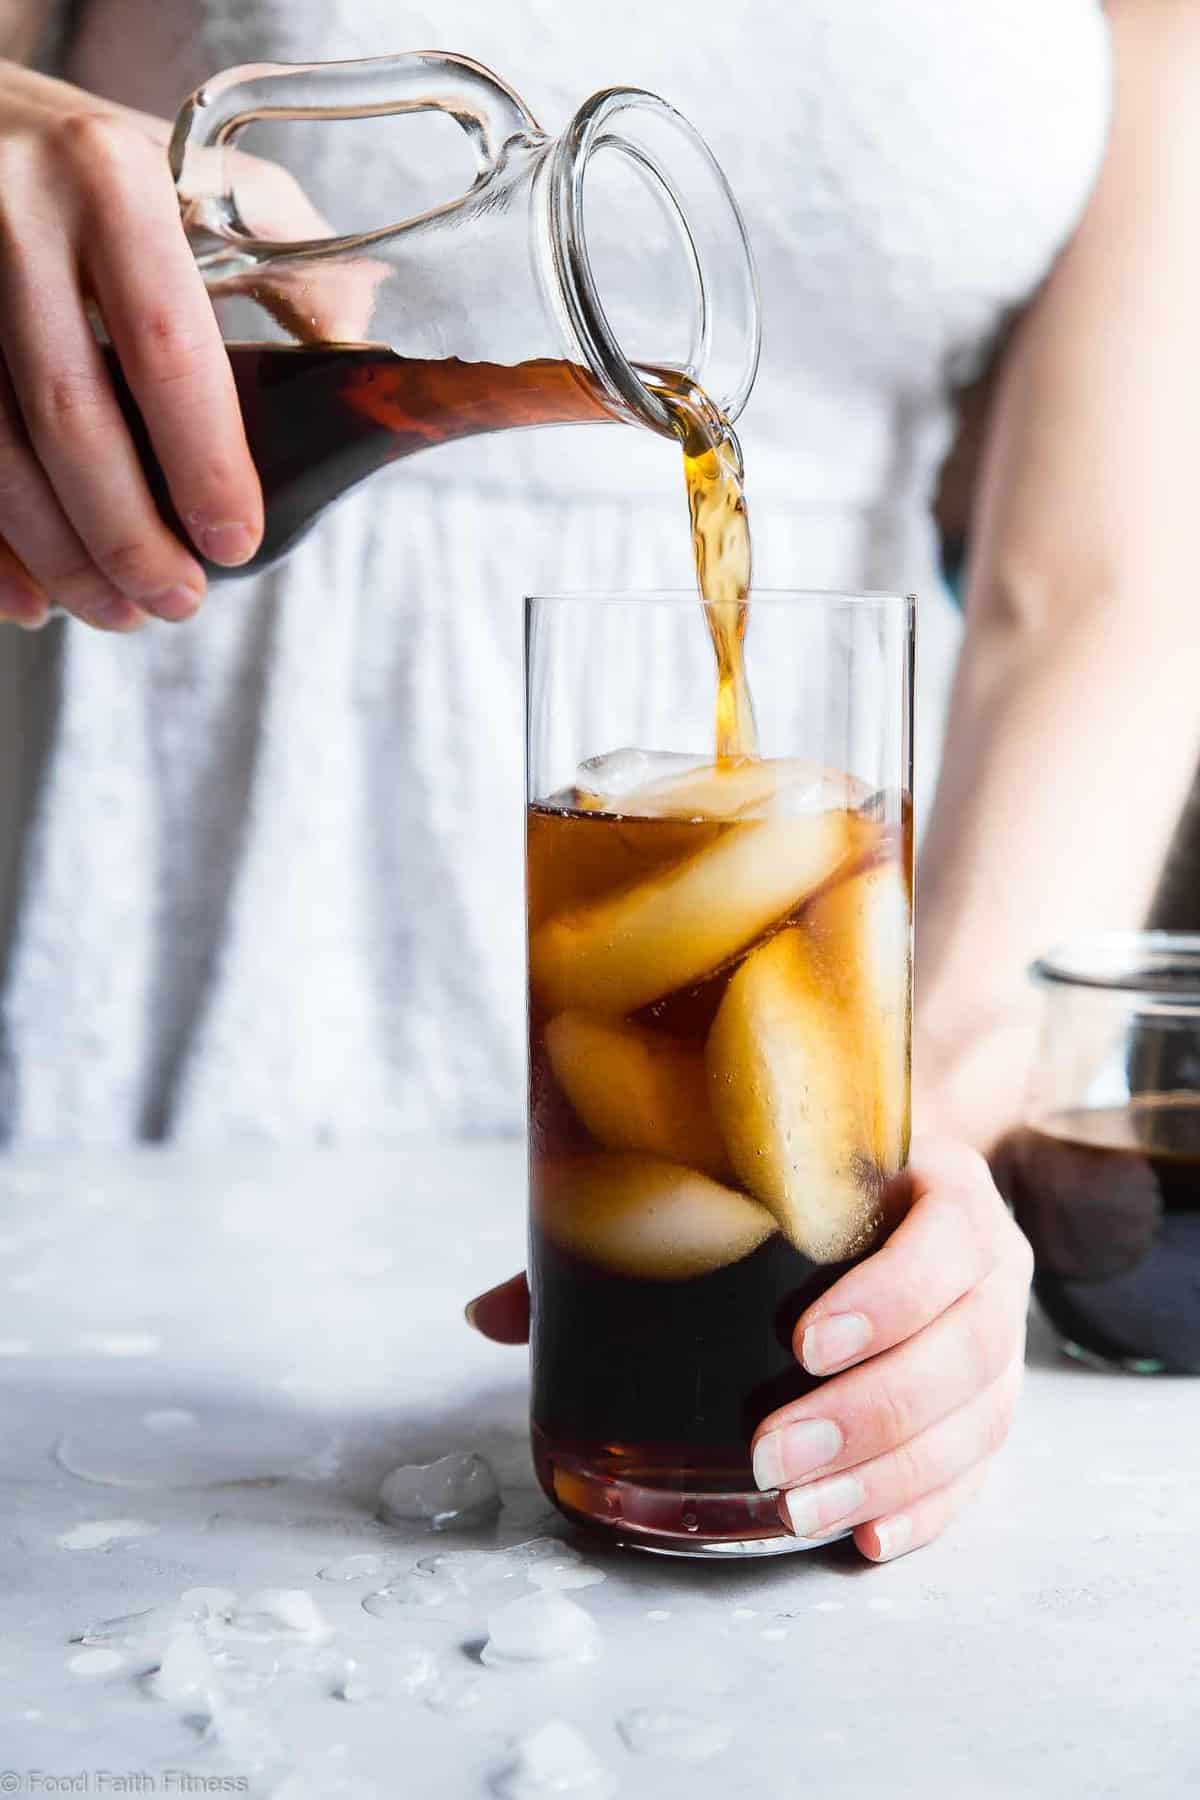 Paleo Homemade Caramel Vanilla Iced Coffee - Tastes WAY better than the coffee shop, is under 200 calories and is SO easy to make! Paleo and vegan friendly and gluten/grain/dairy/refined sugar free too! | #Foodfaithfitness | #Vegan #Paleo #Healthy #Glutenfree #Dairyfree